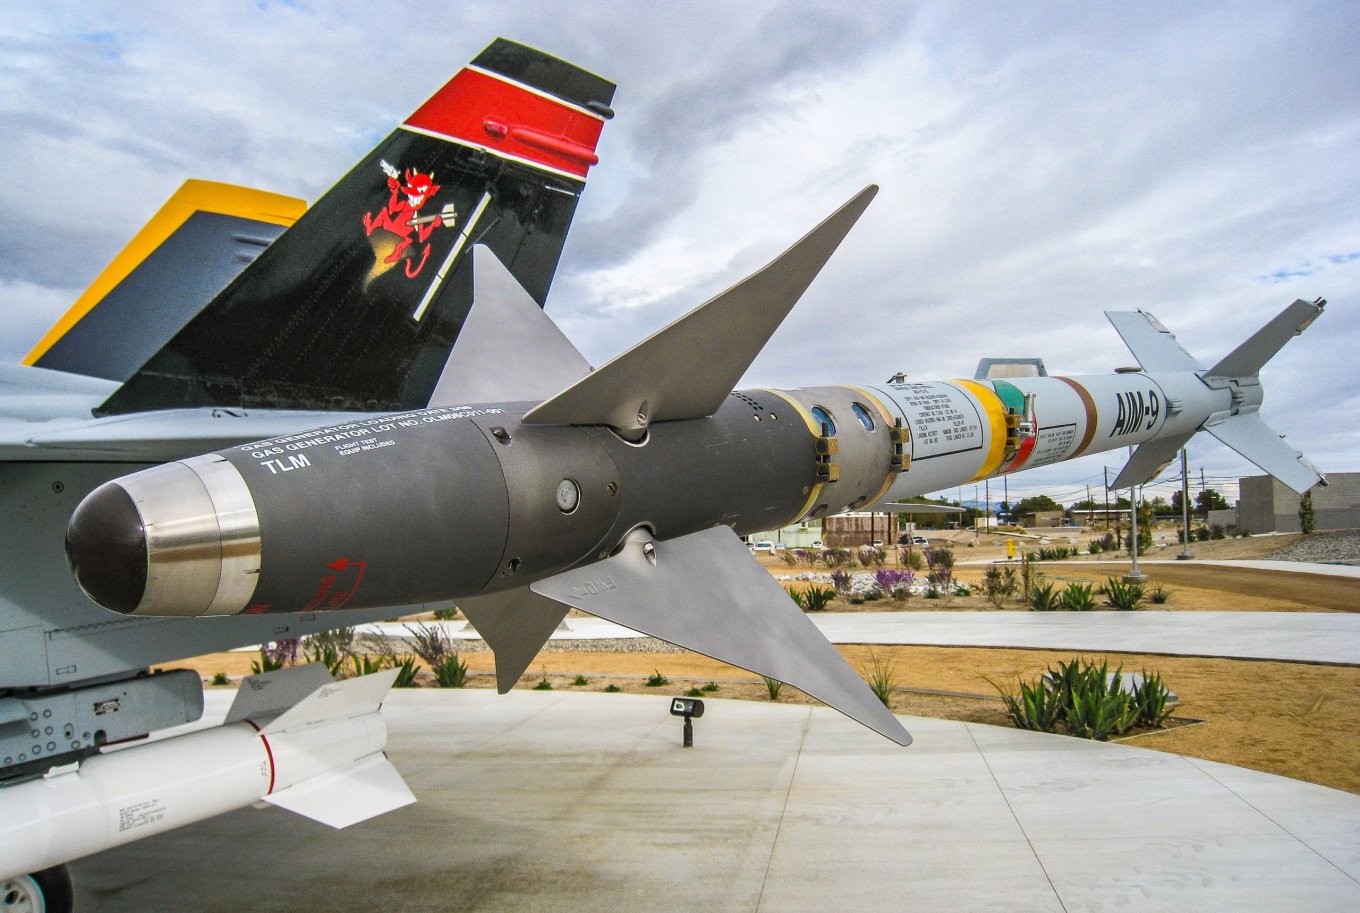 Photo for illustration - AIM-9M missiles for air defense